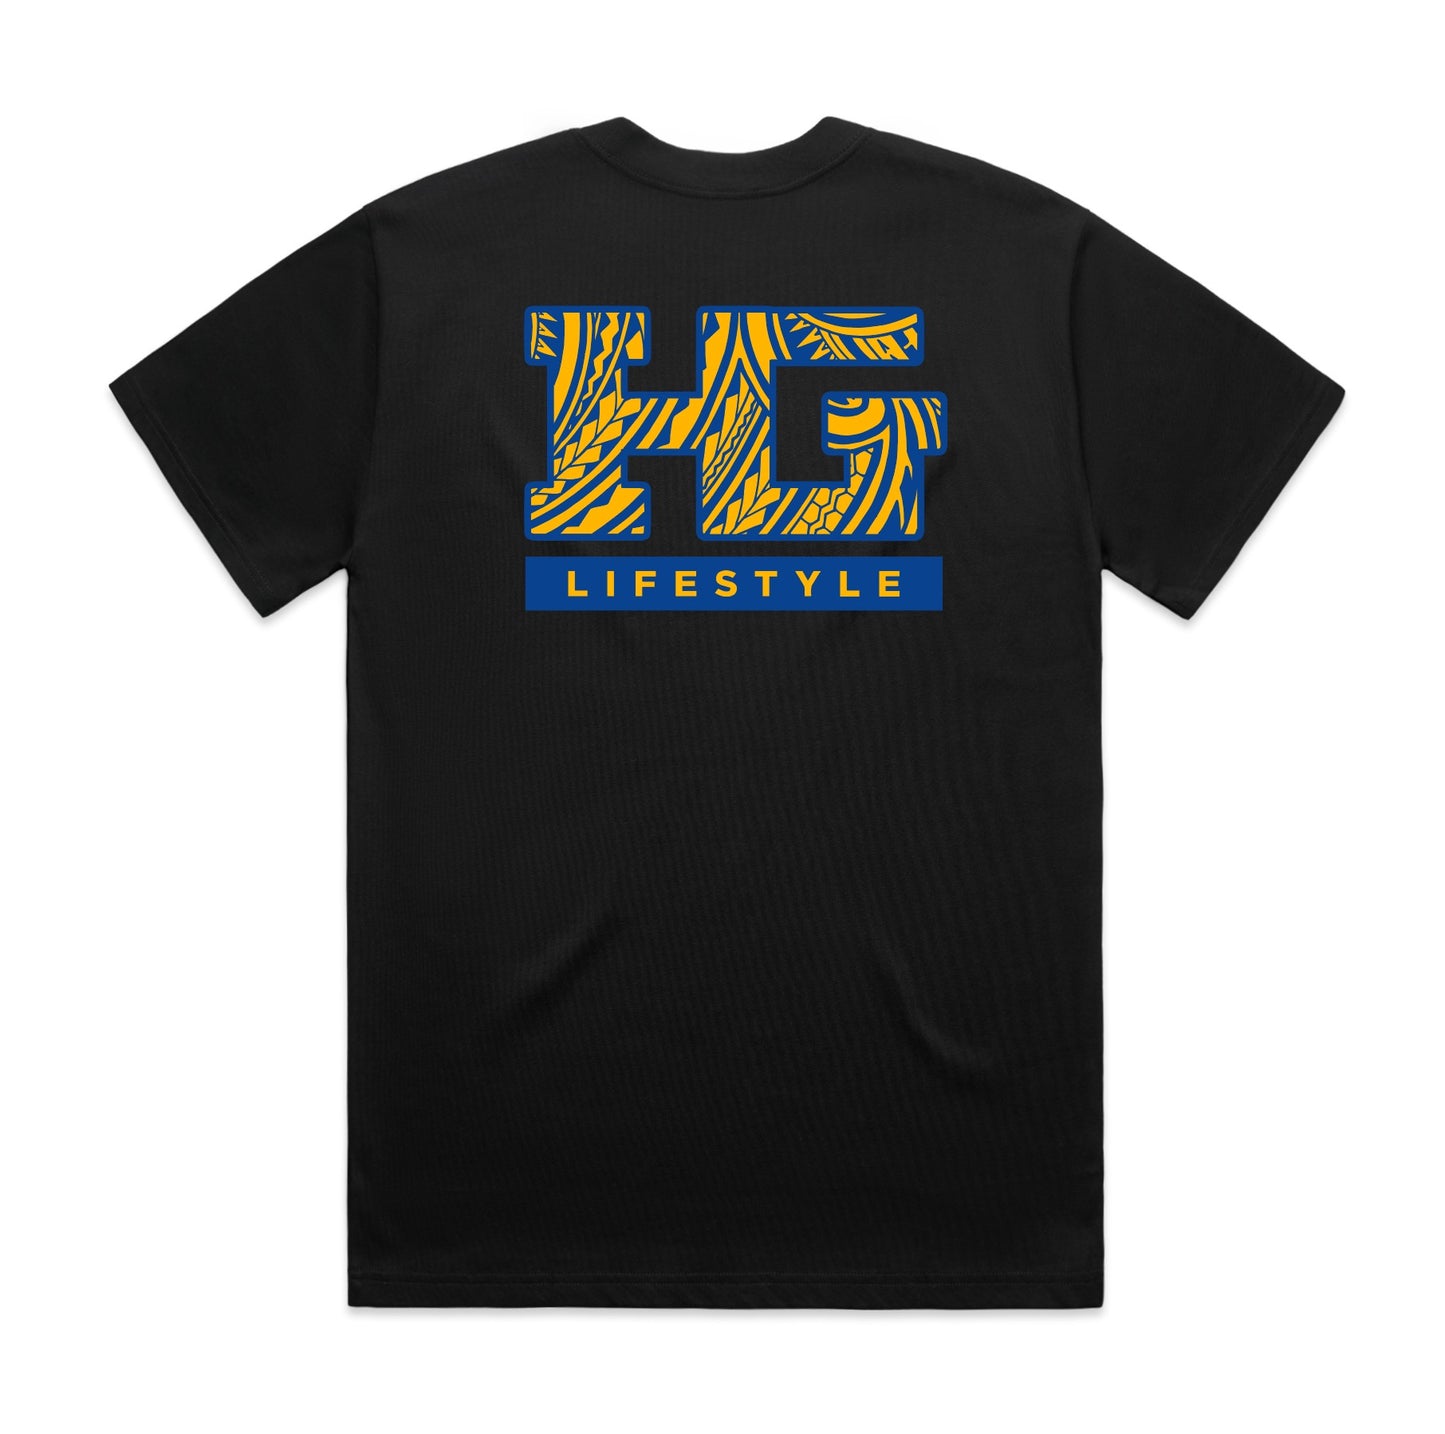 OG HG Tribal Tee “Blue/Gold Print” - Available in 3 colors